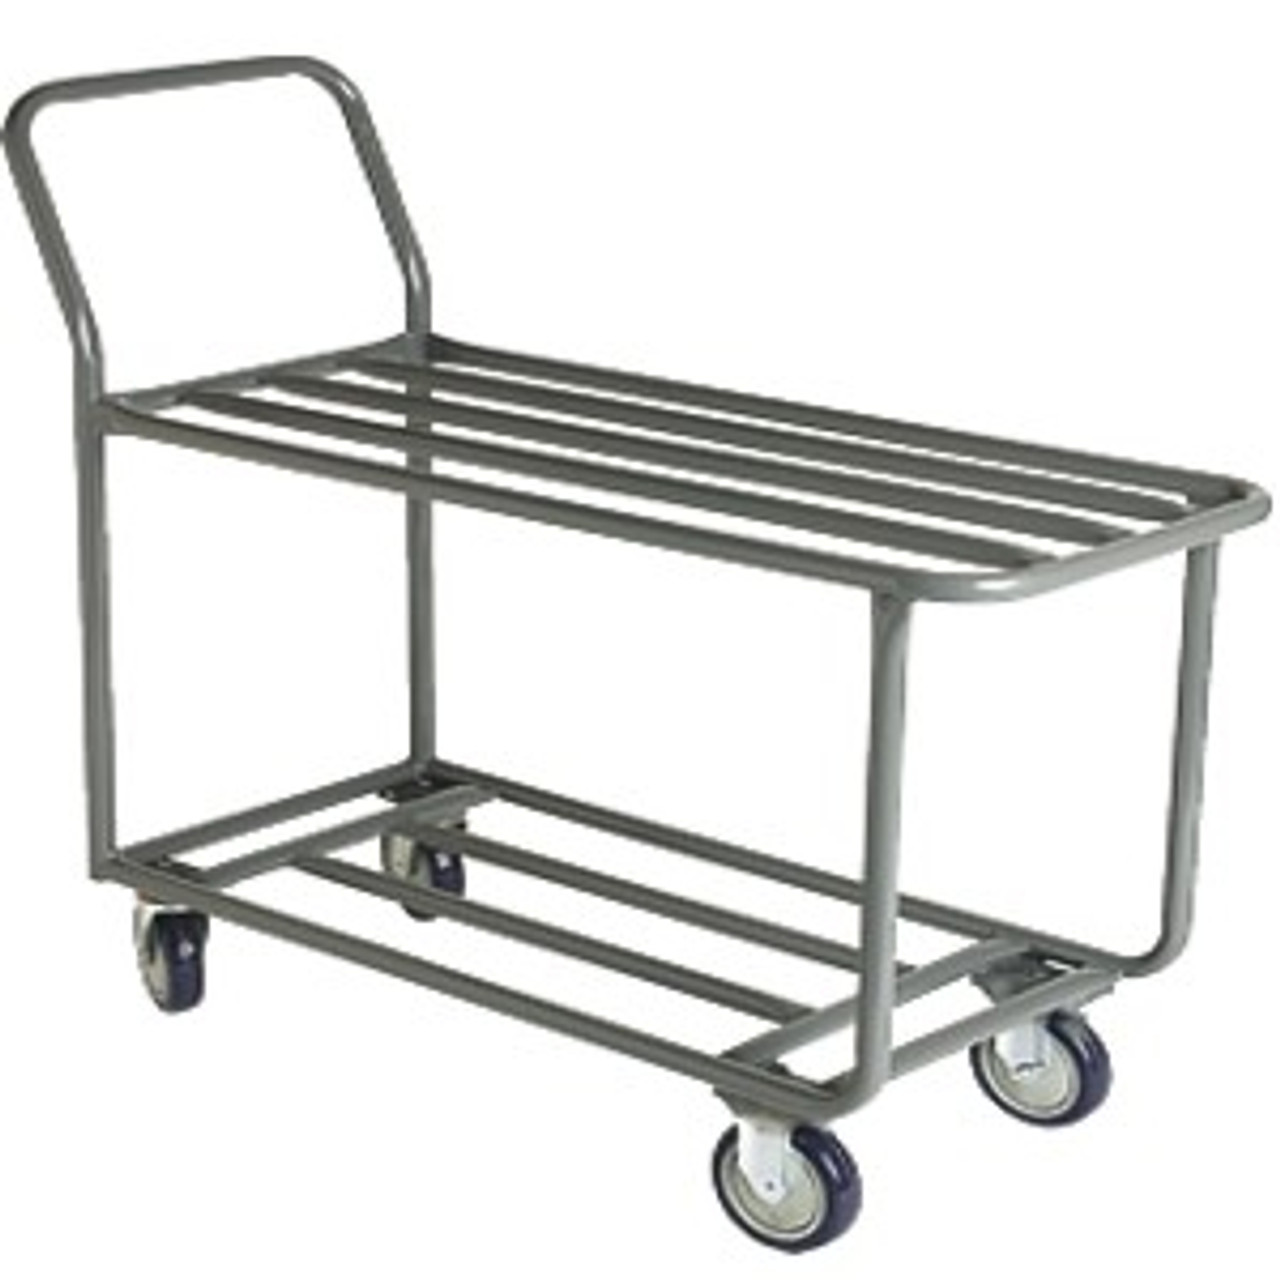 H5BE Extended Stock Cart 16"x45" 800lb cap 5" Caster